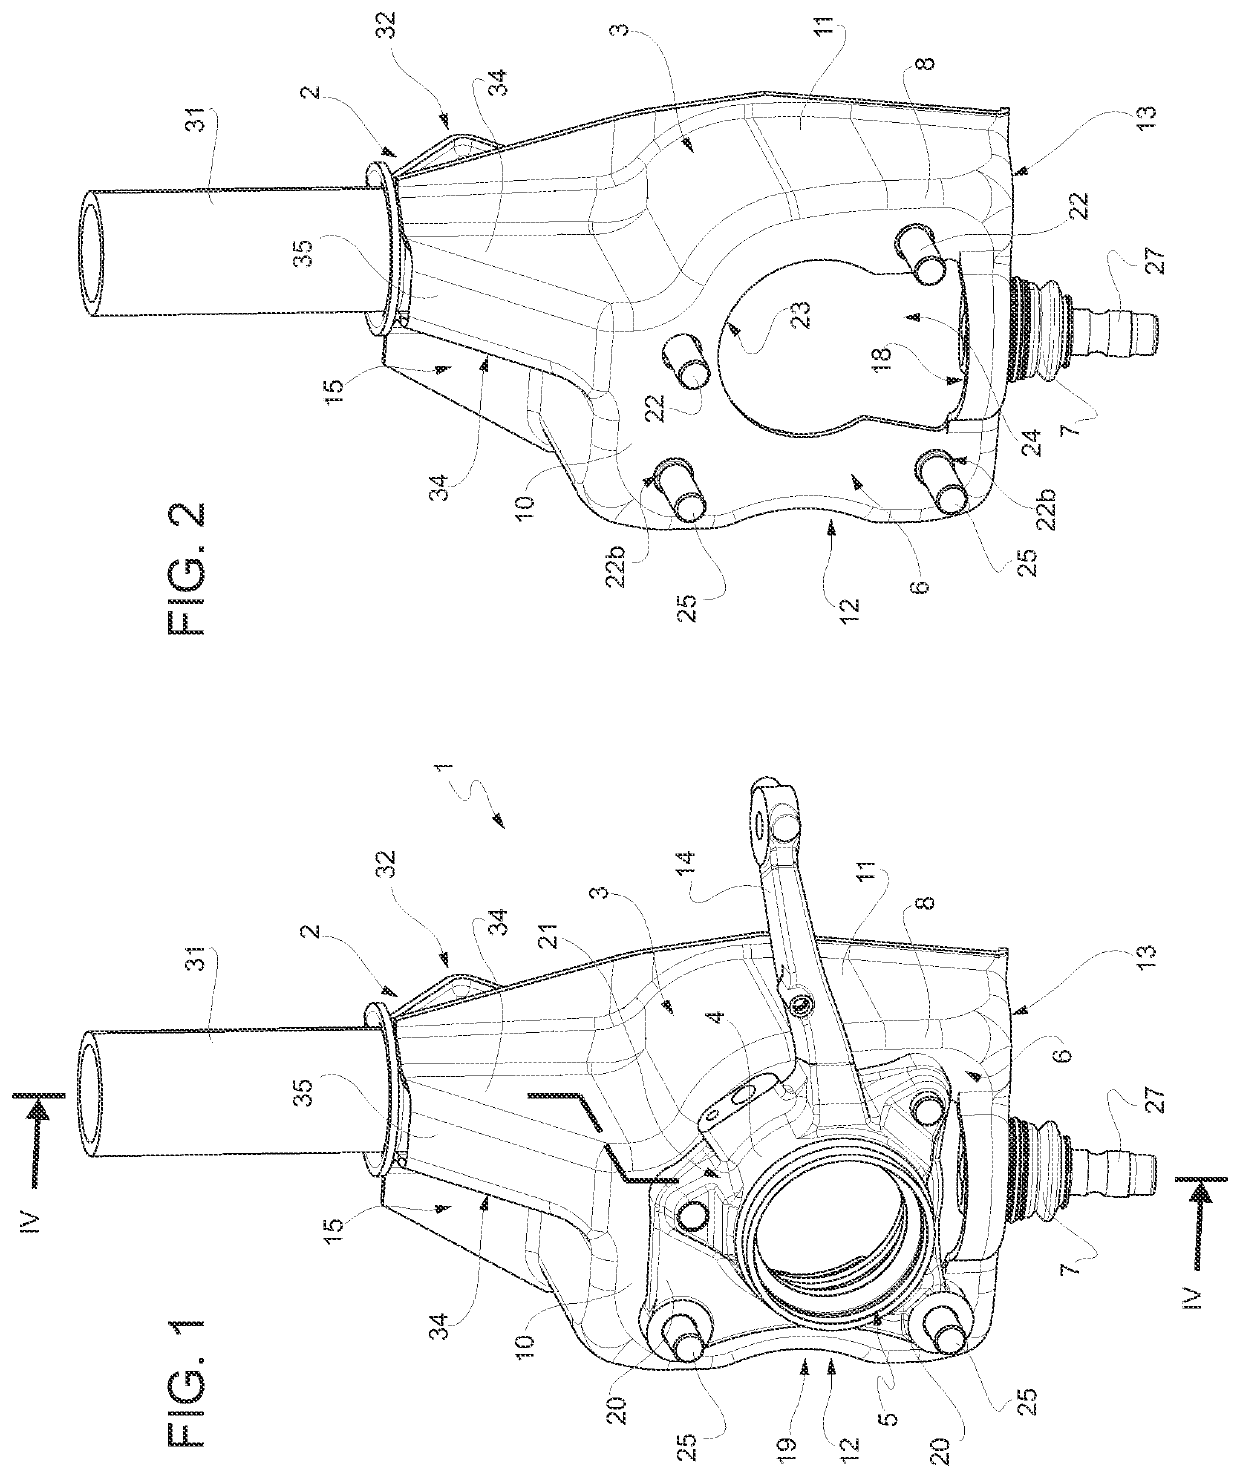 Integrated Steering Suspension Module For A Vehicle